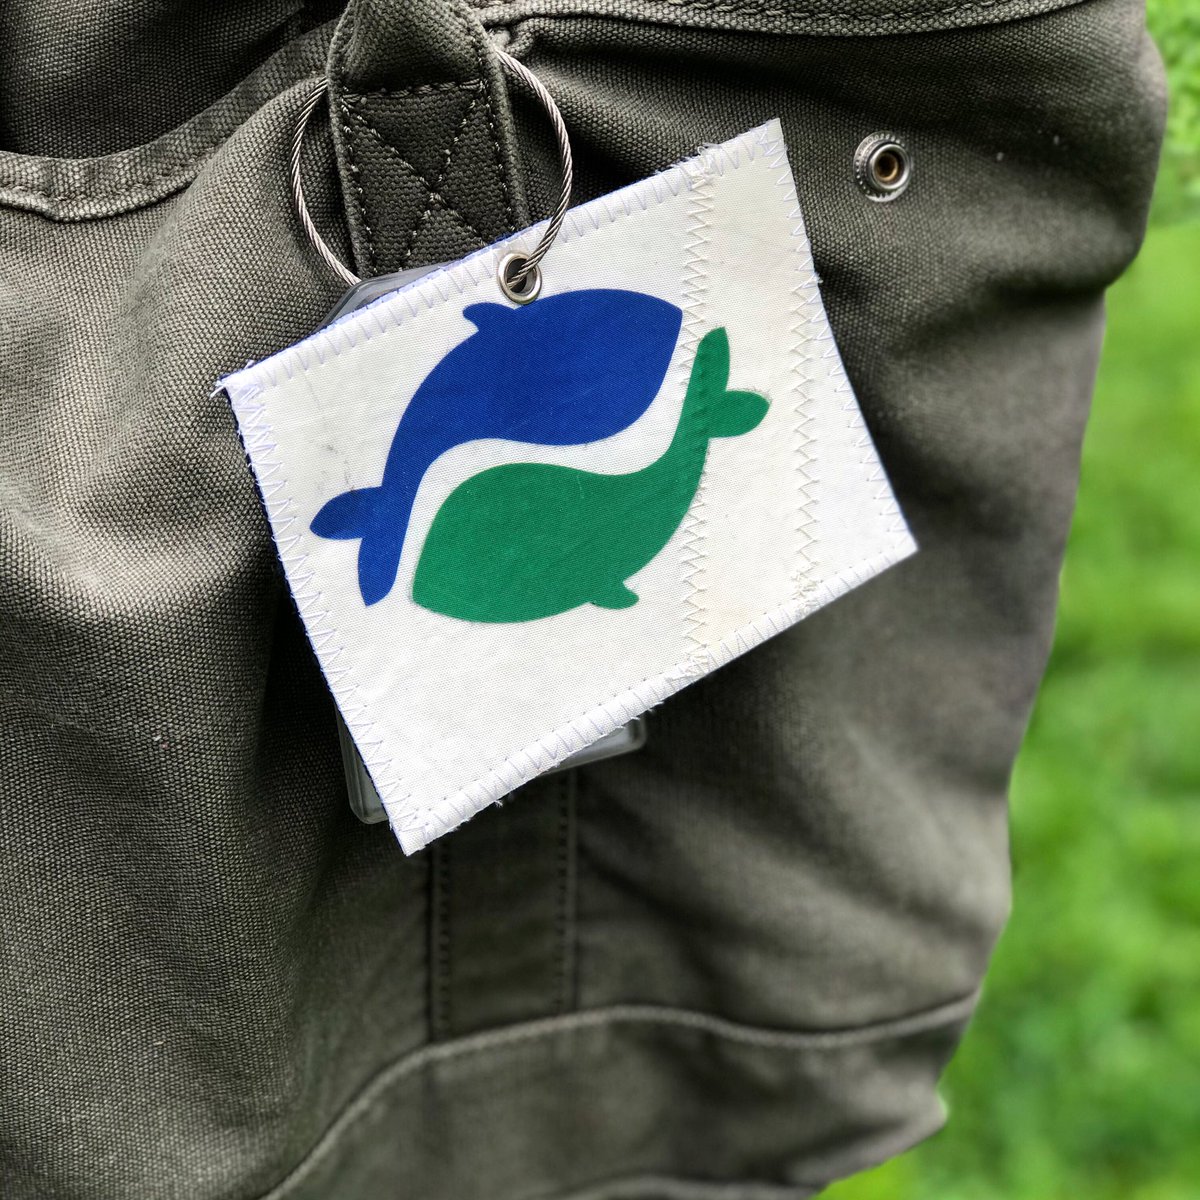 Local day trips are all the rage nowadays.  Bag tags available @shopcrompton and @etsy.
.
.
.
#freshandsalty #bostonmade #newenglandmade #retiredsailcloth #nauticalvibe #whales #bagtag #luggagetag #yingyangwhales #cromptoncollective #shopcrompton #daytrips #localtrips #etsy